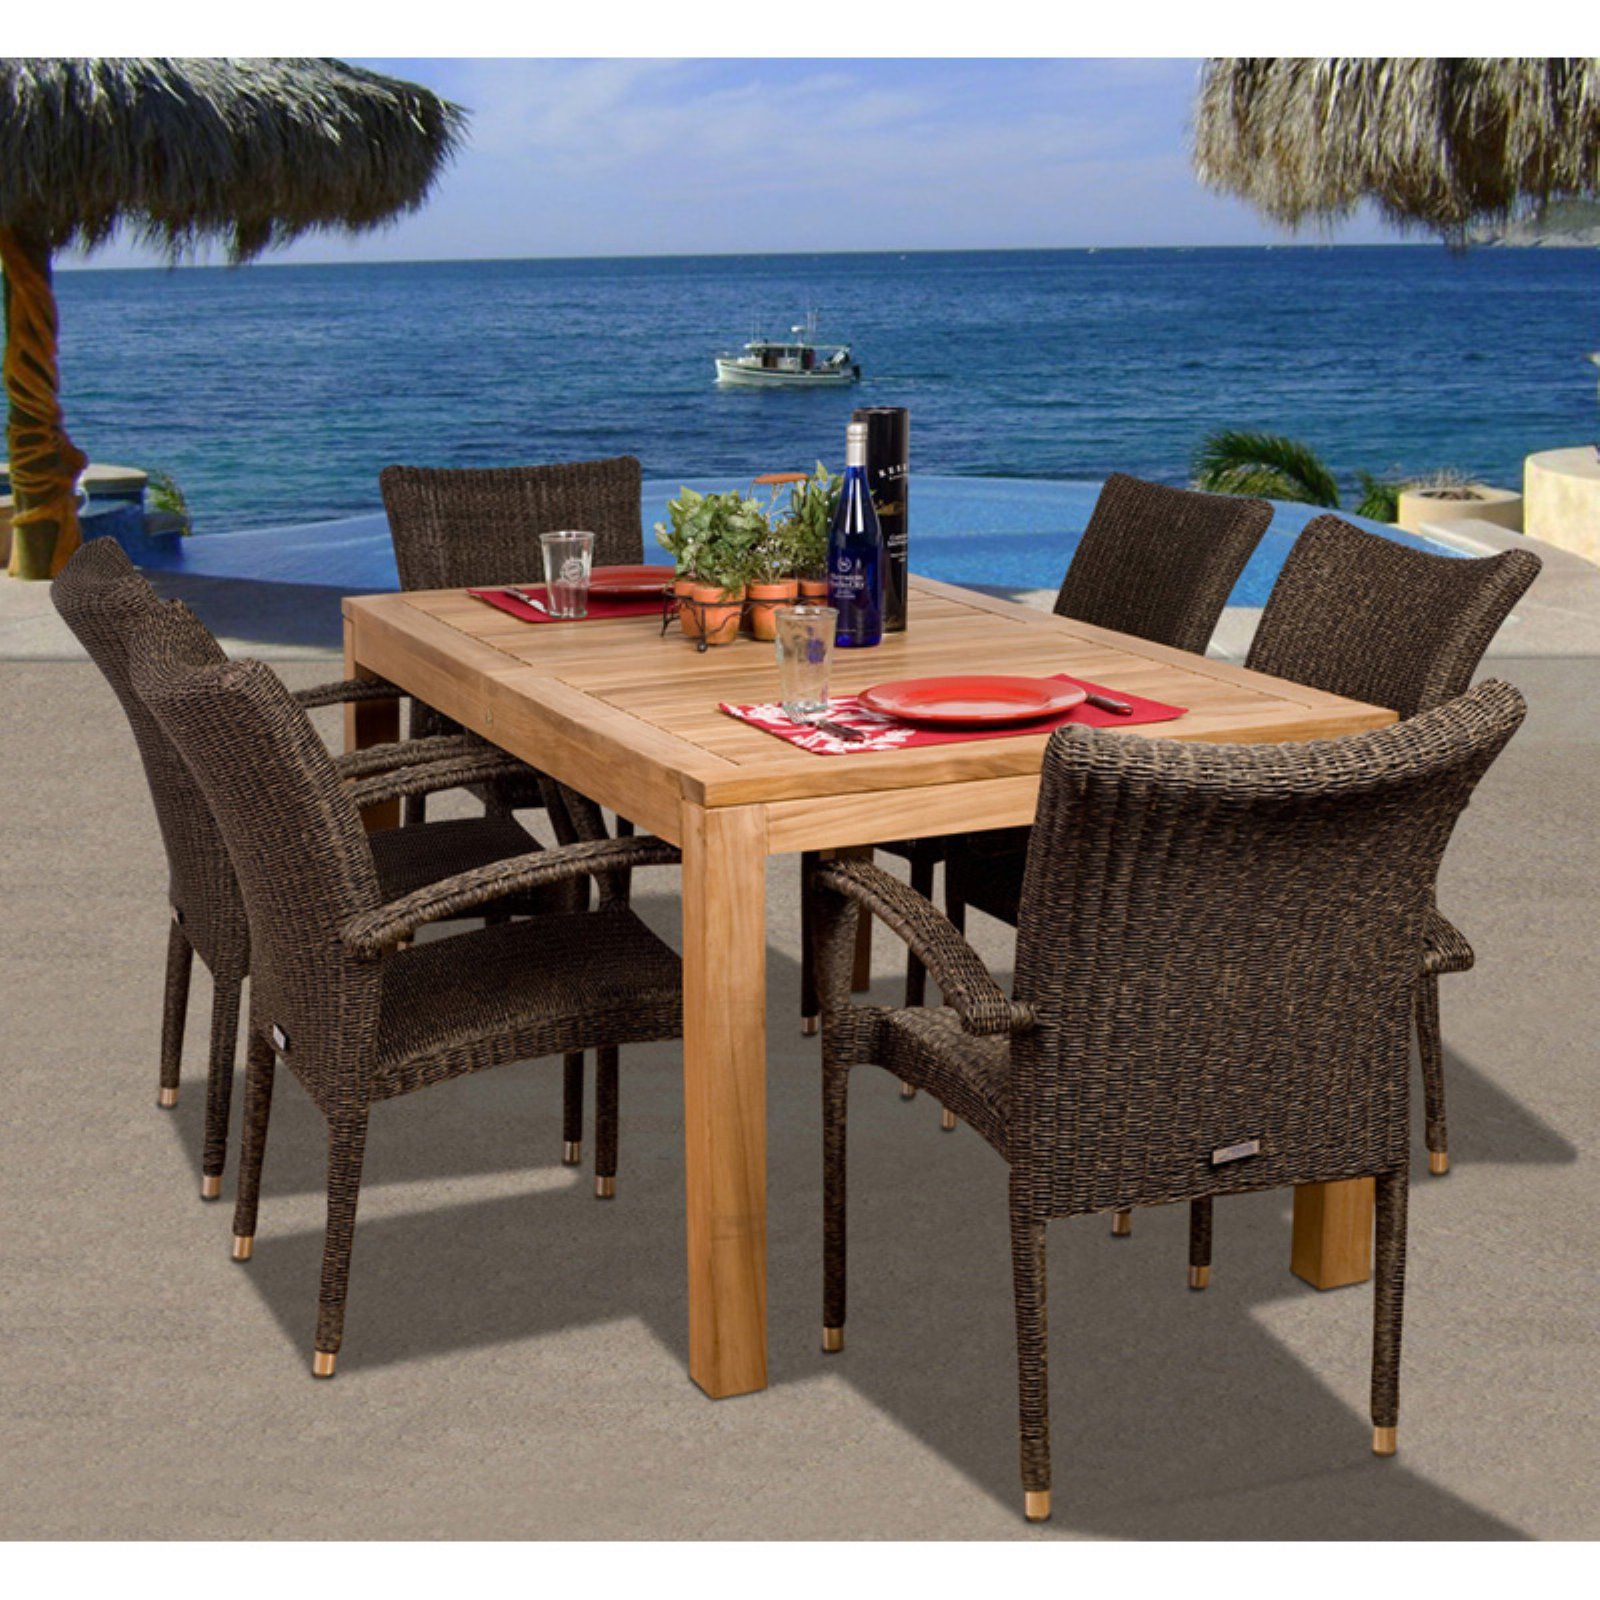 Outdoor Amazonia Brussels Teak Dining Set – Seats 6 | Wicker Dining Set Throughout Rectangular Teak And Eucalyptus Patio Dining Sets (View 3 of 15)